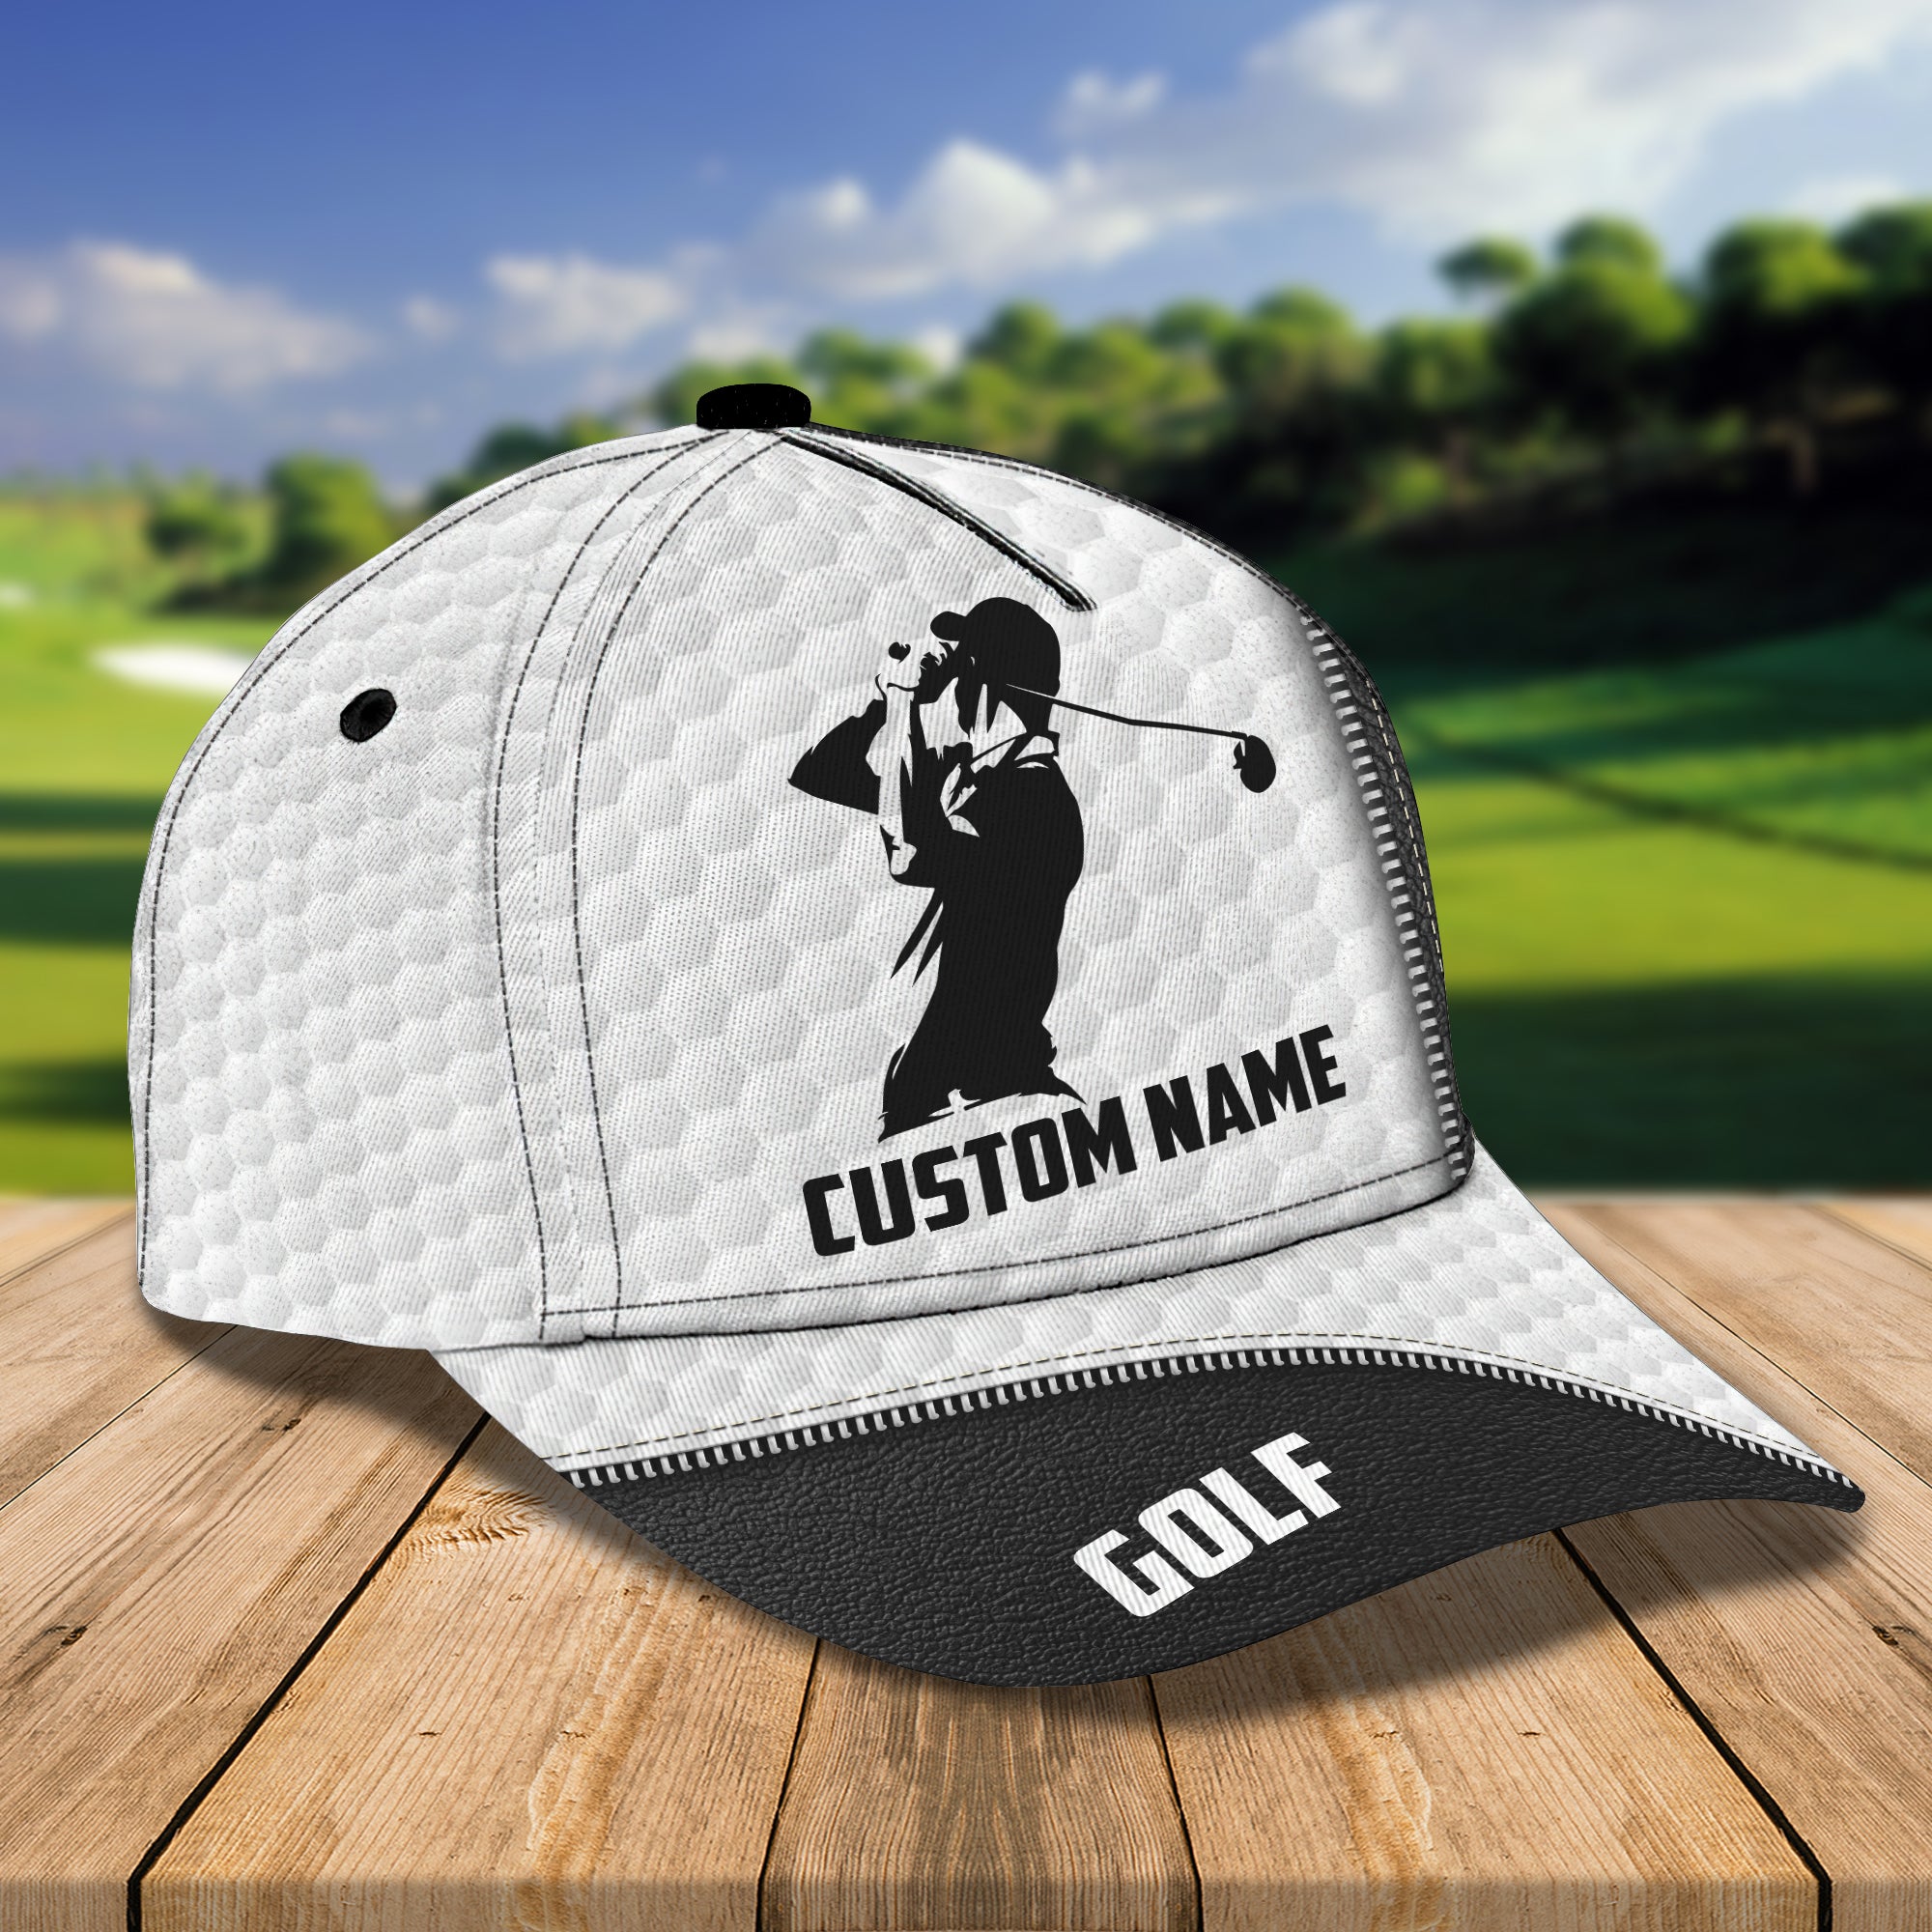 Golf 2 - Personalized Name Cap - HY97